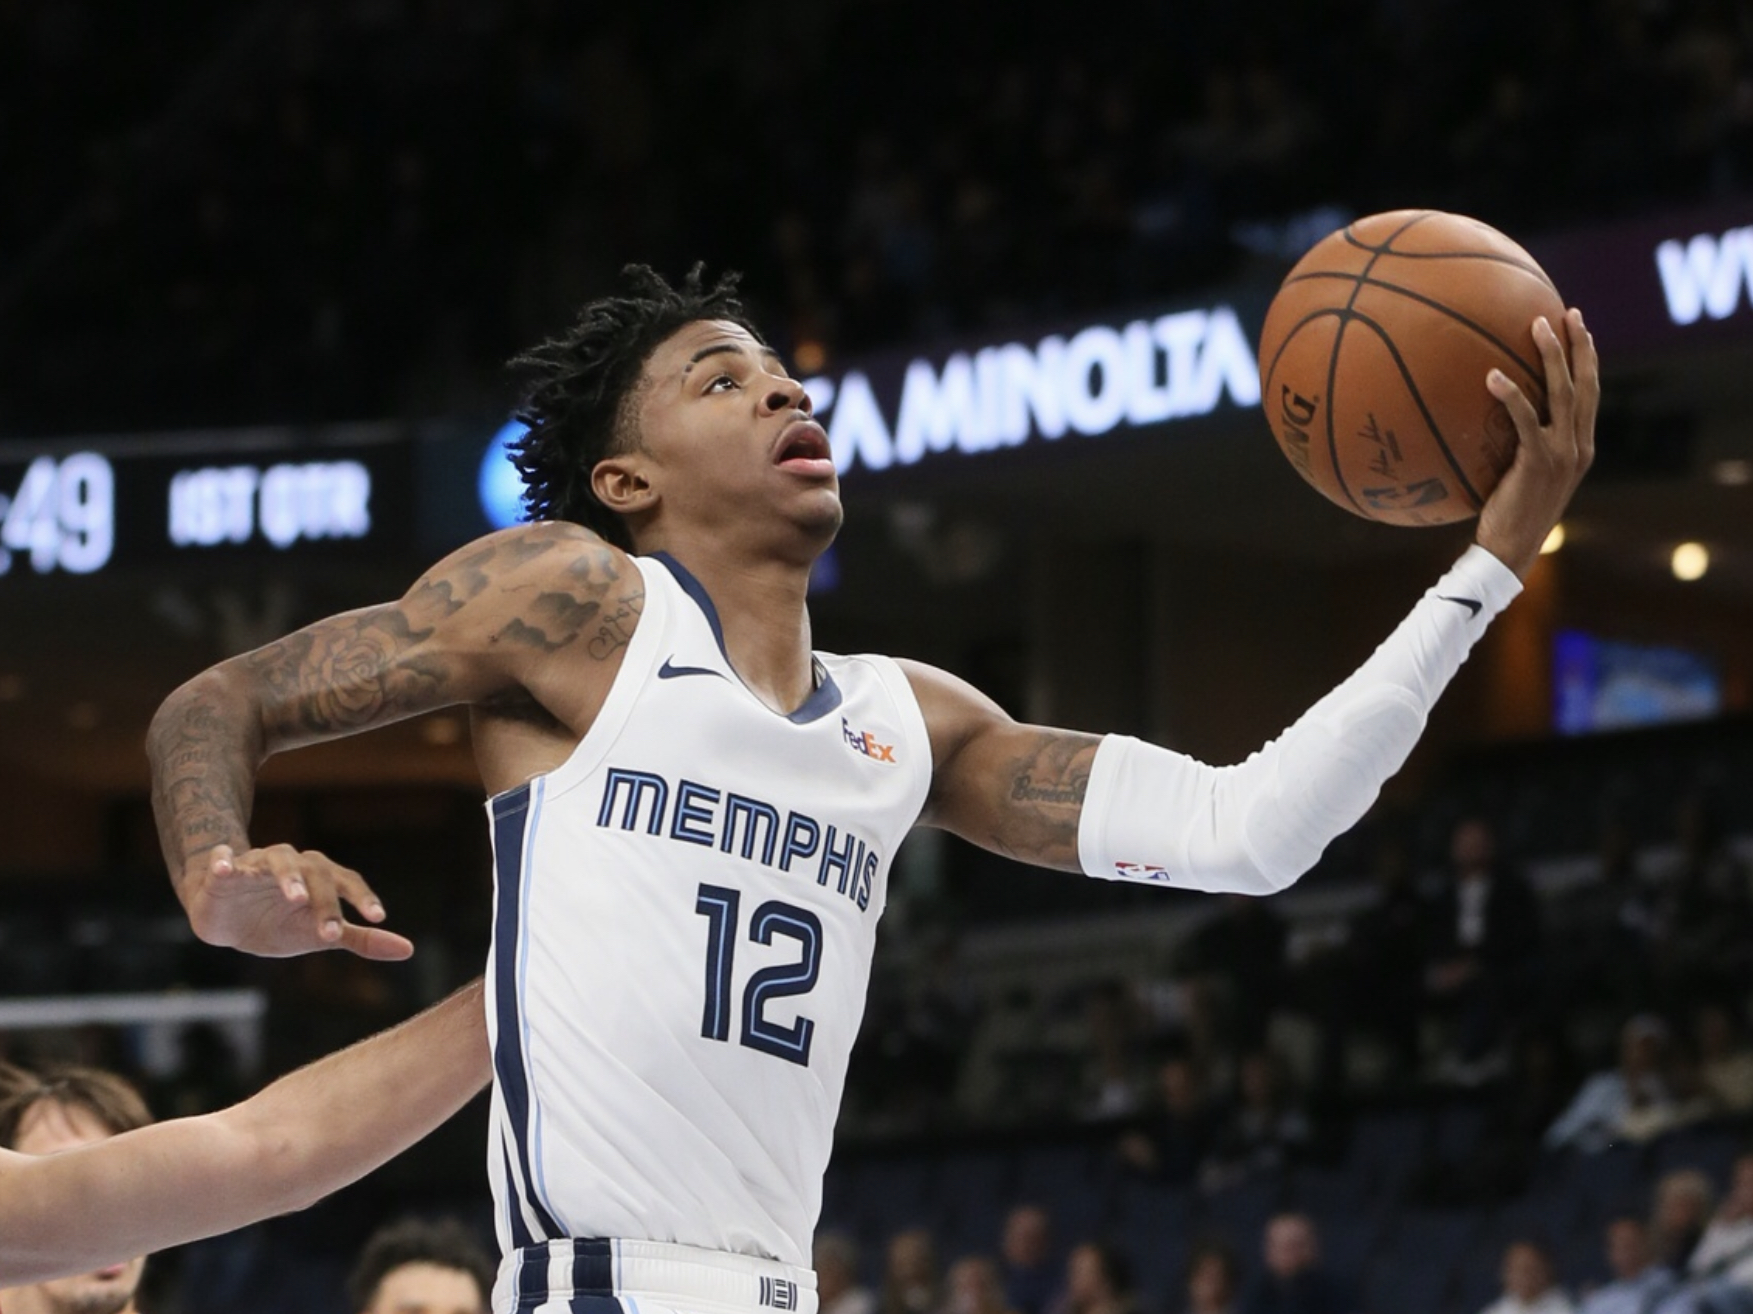 WATCH: Grizzlies' Ja Morant with filthy put-back slam